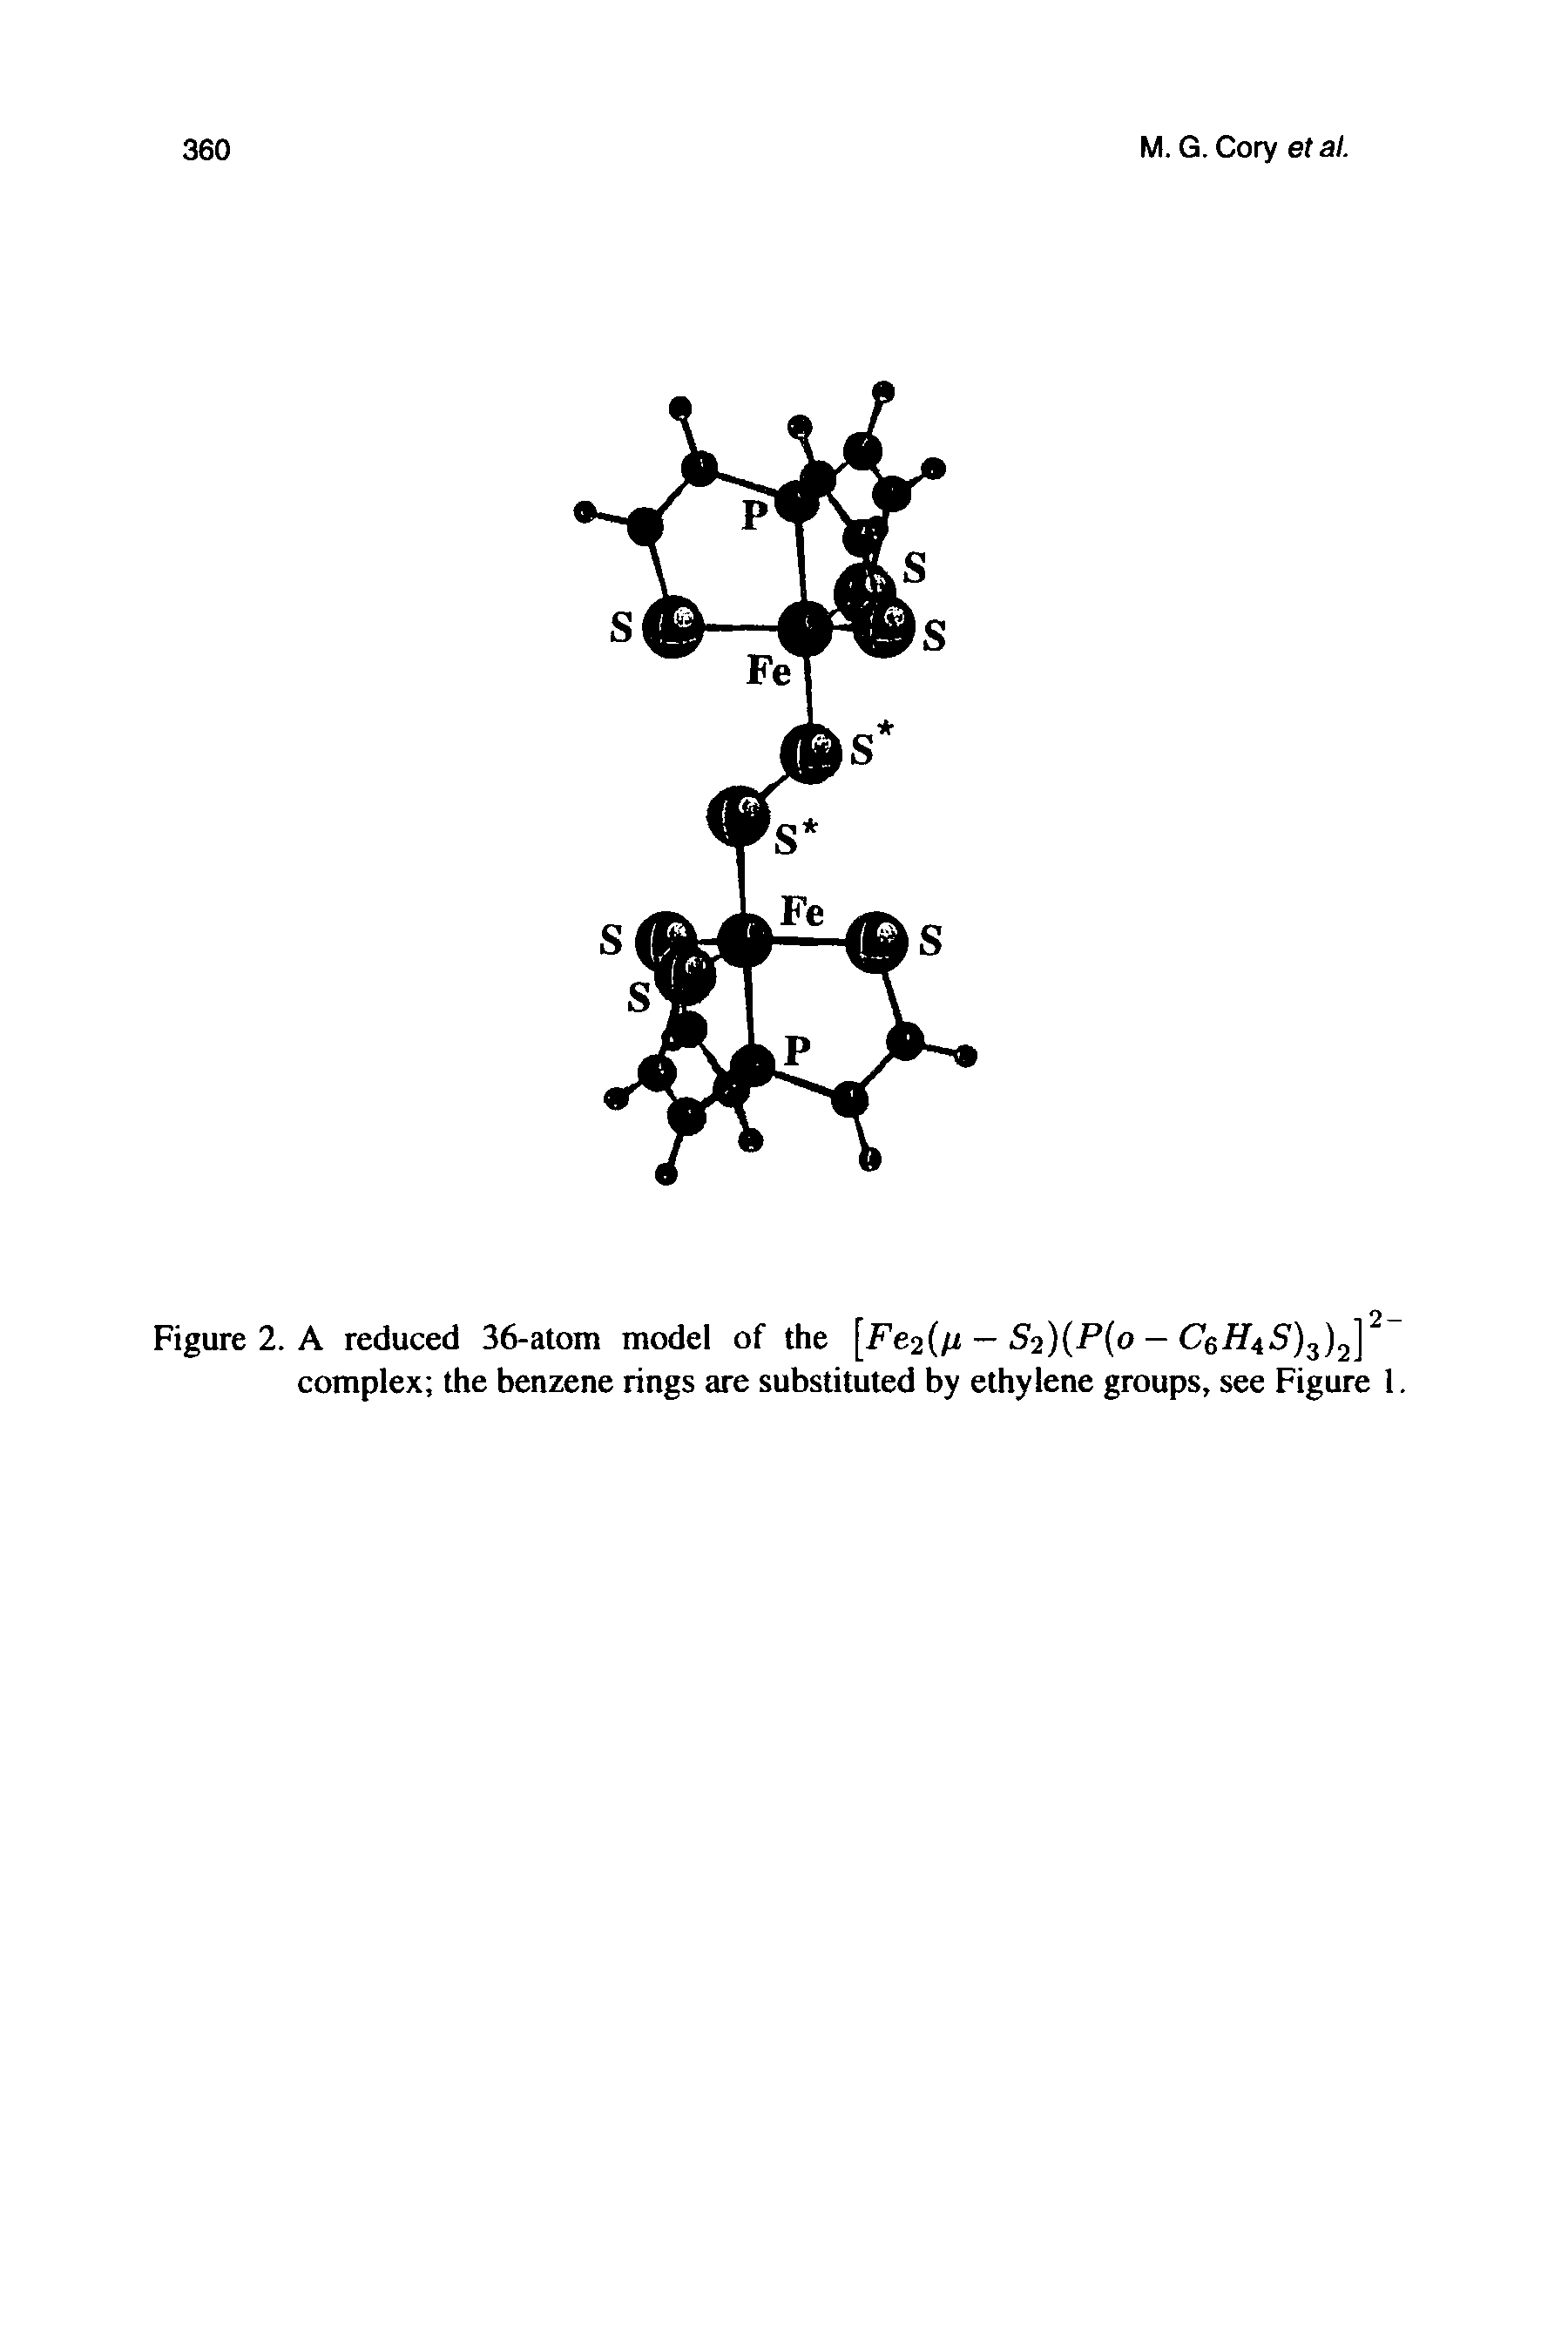 Figure 2. A reduced 36-atom model of the [Fe2(fi — S2)(P o - CeH4S) ) complex the benzene rings are substituted by ethylene groups, see Figure 1...